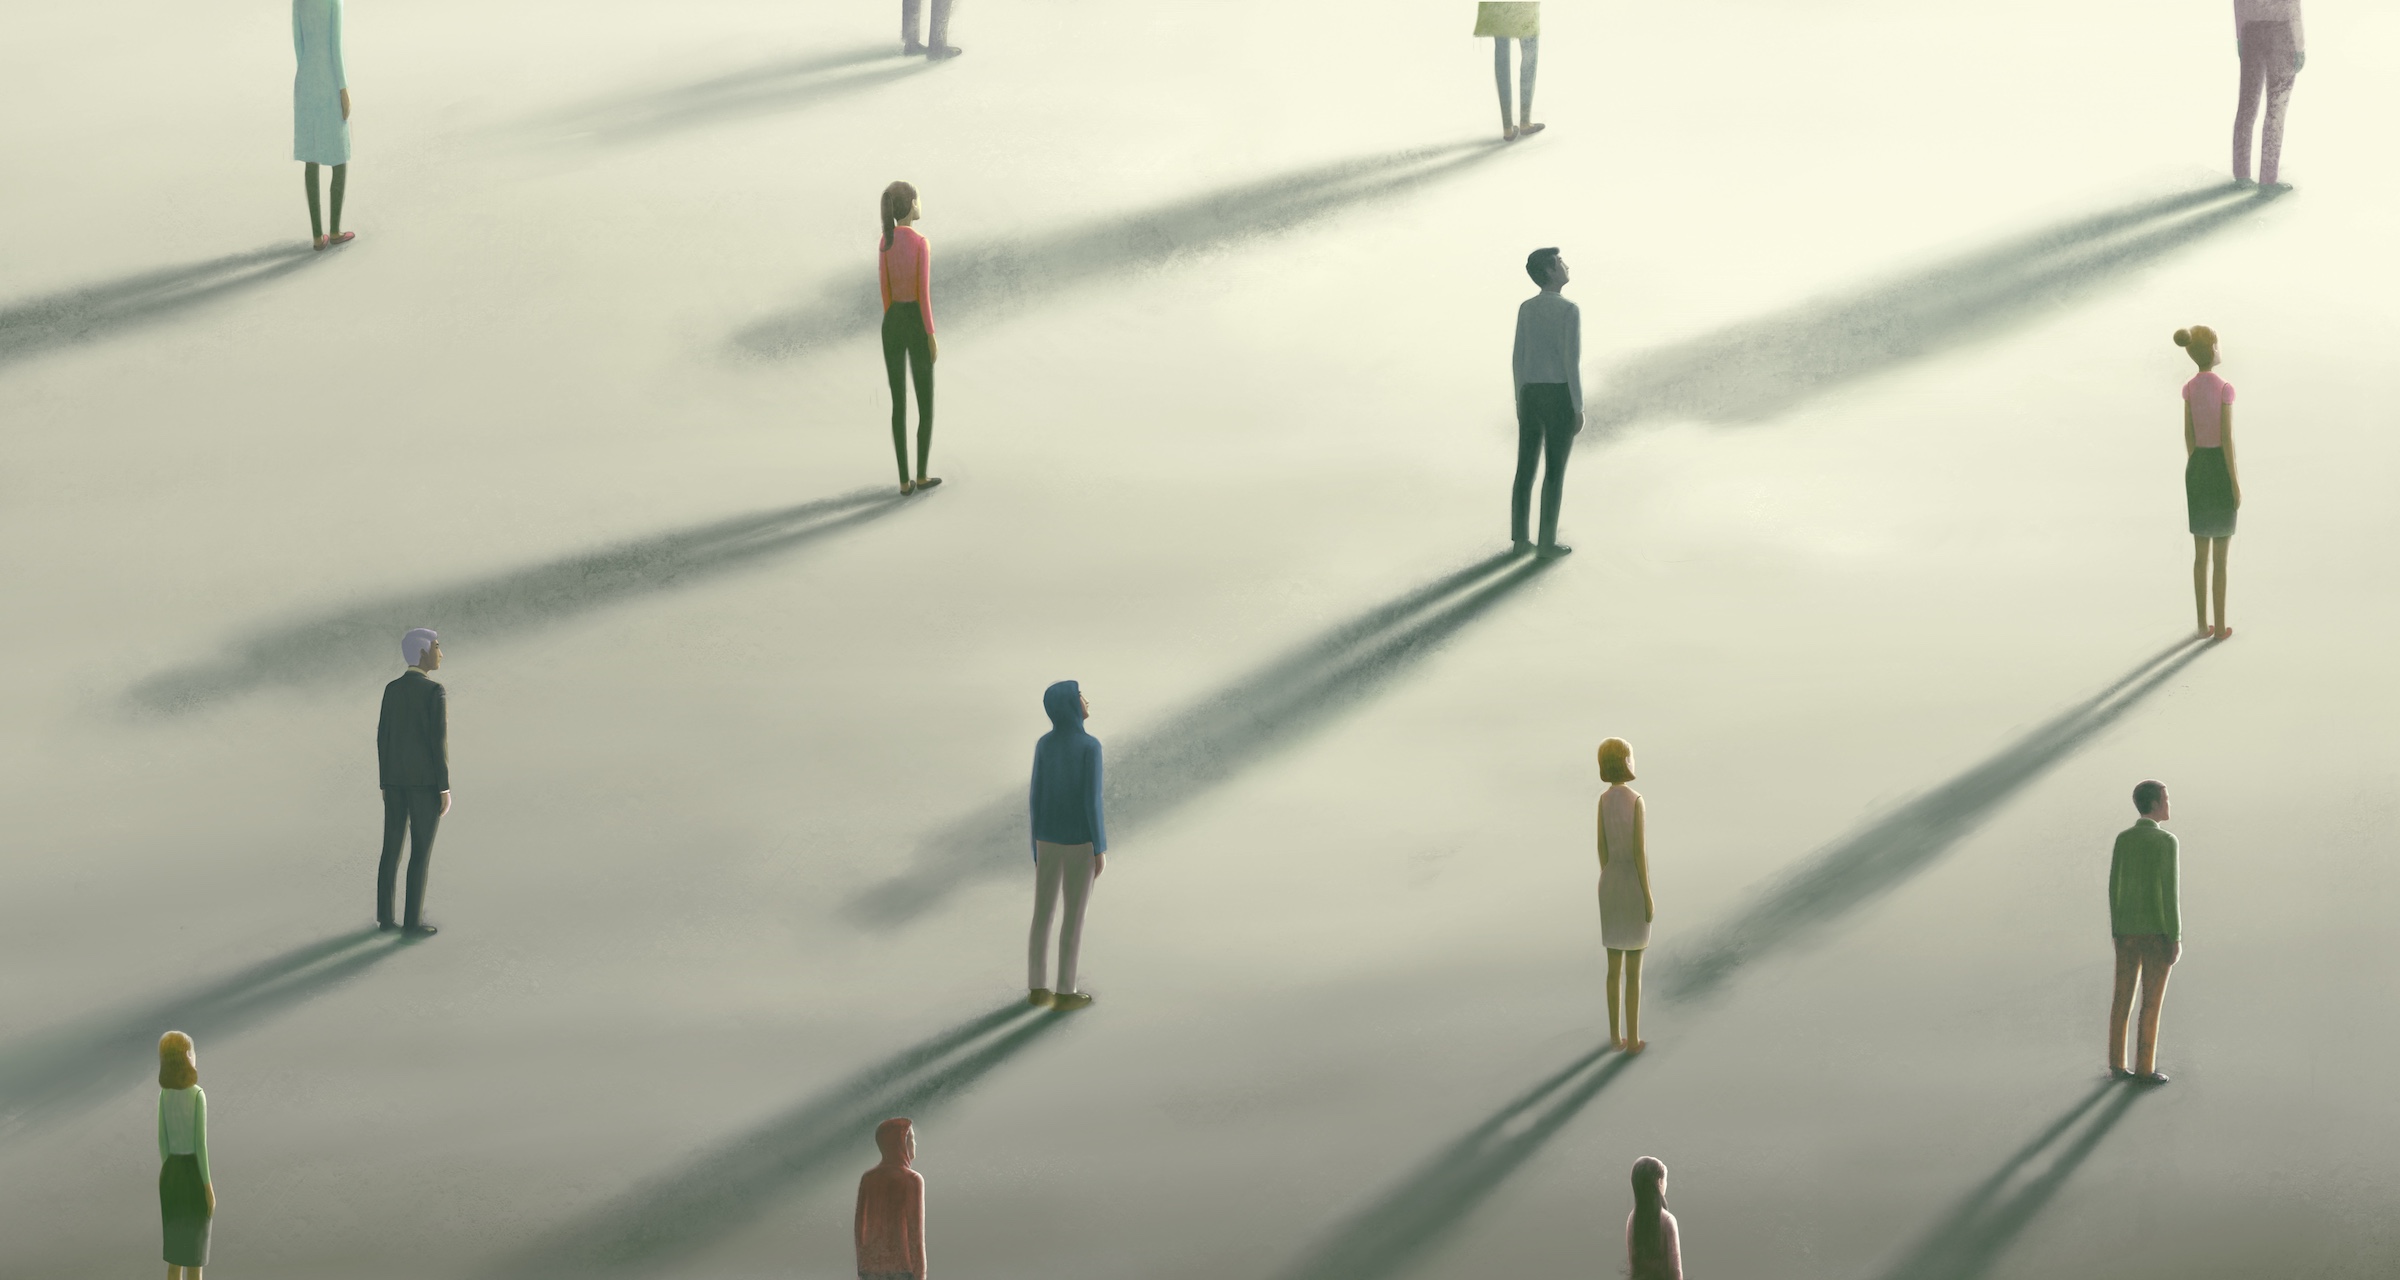 Surreal painting hope lonely and loneliness of crowd concept. minimal illustration, conceptual art, digital artwork